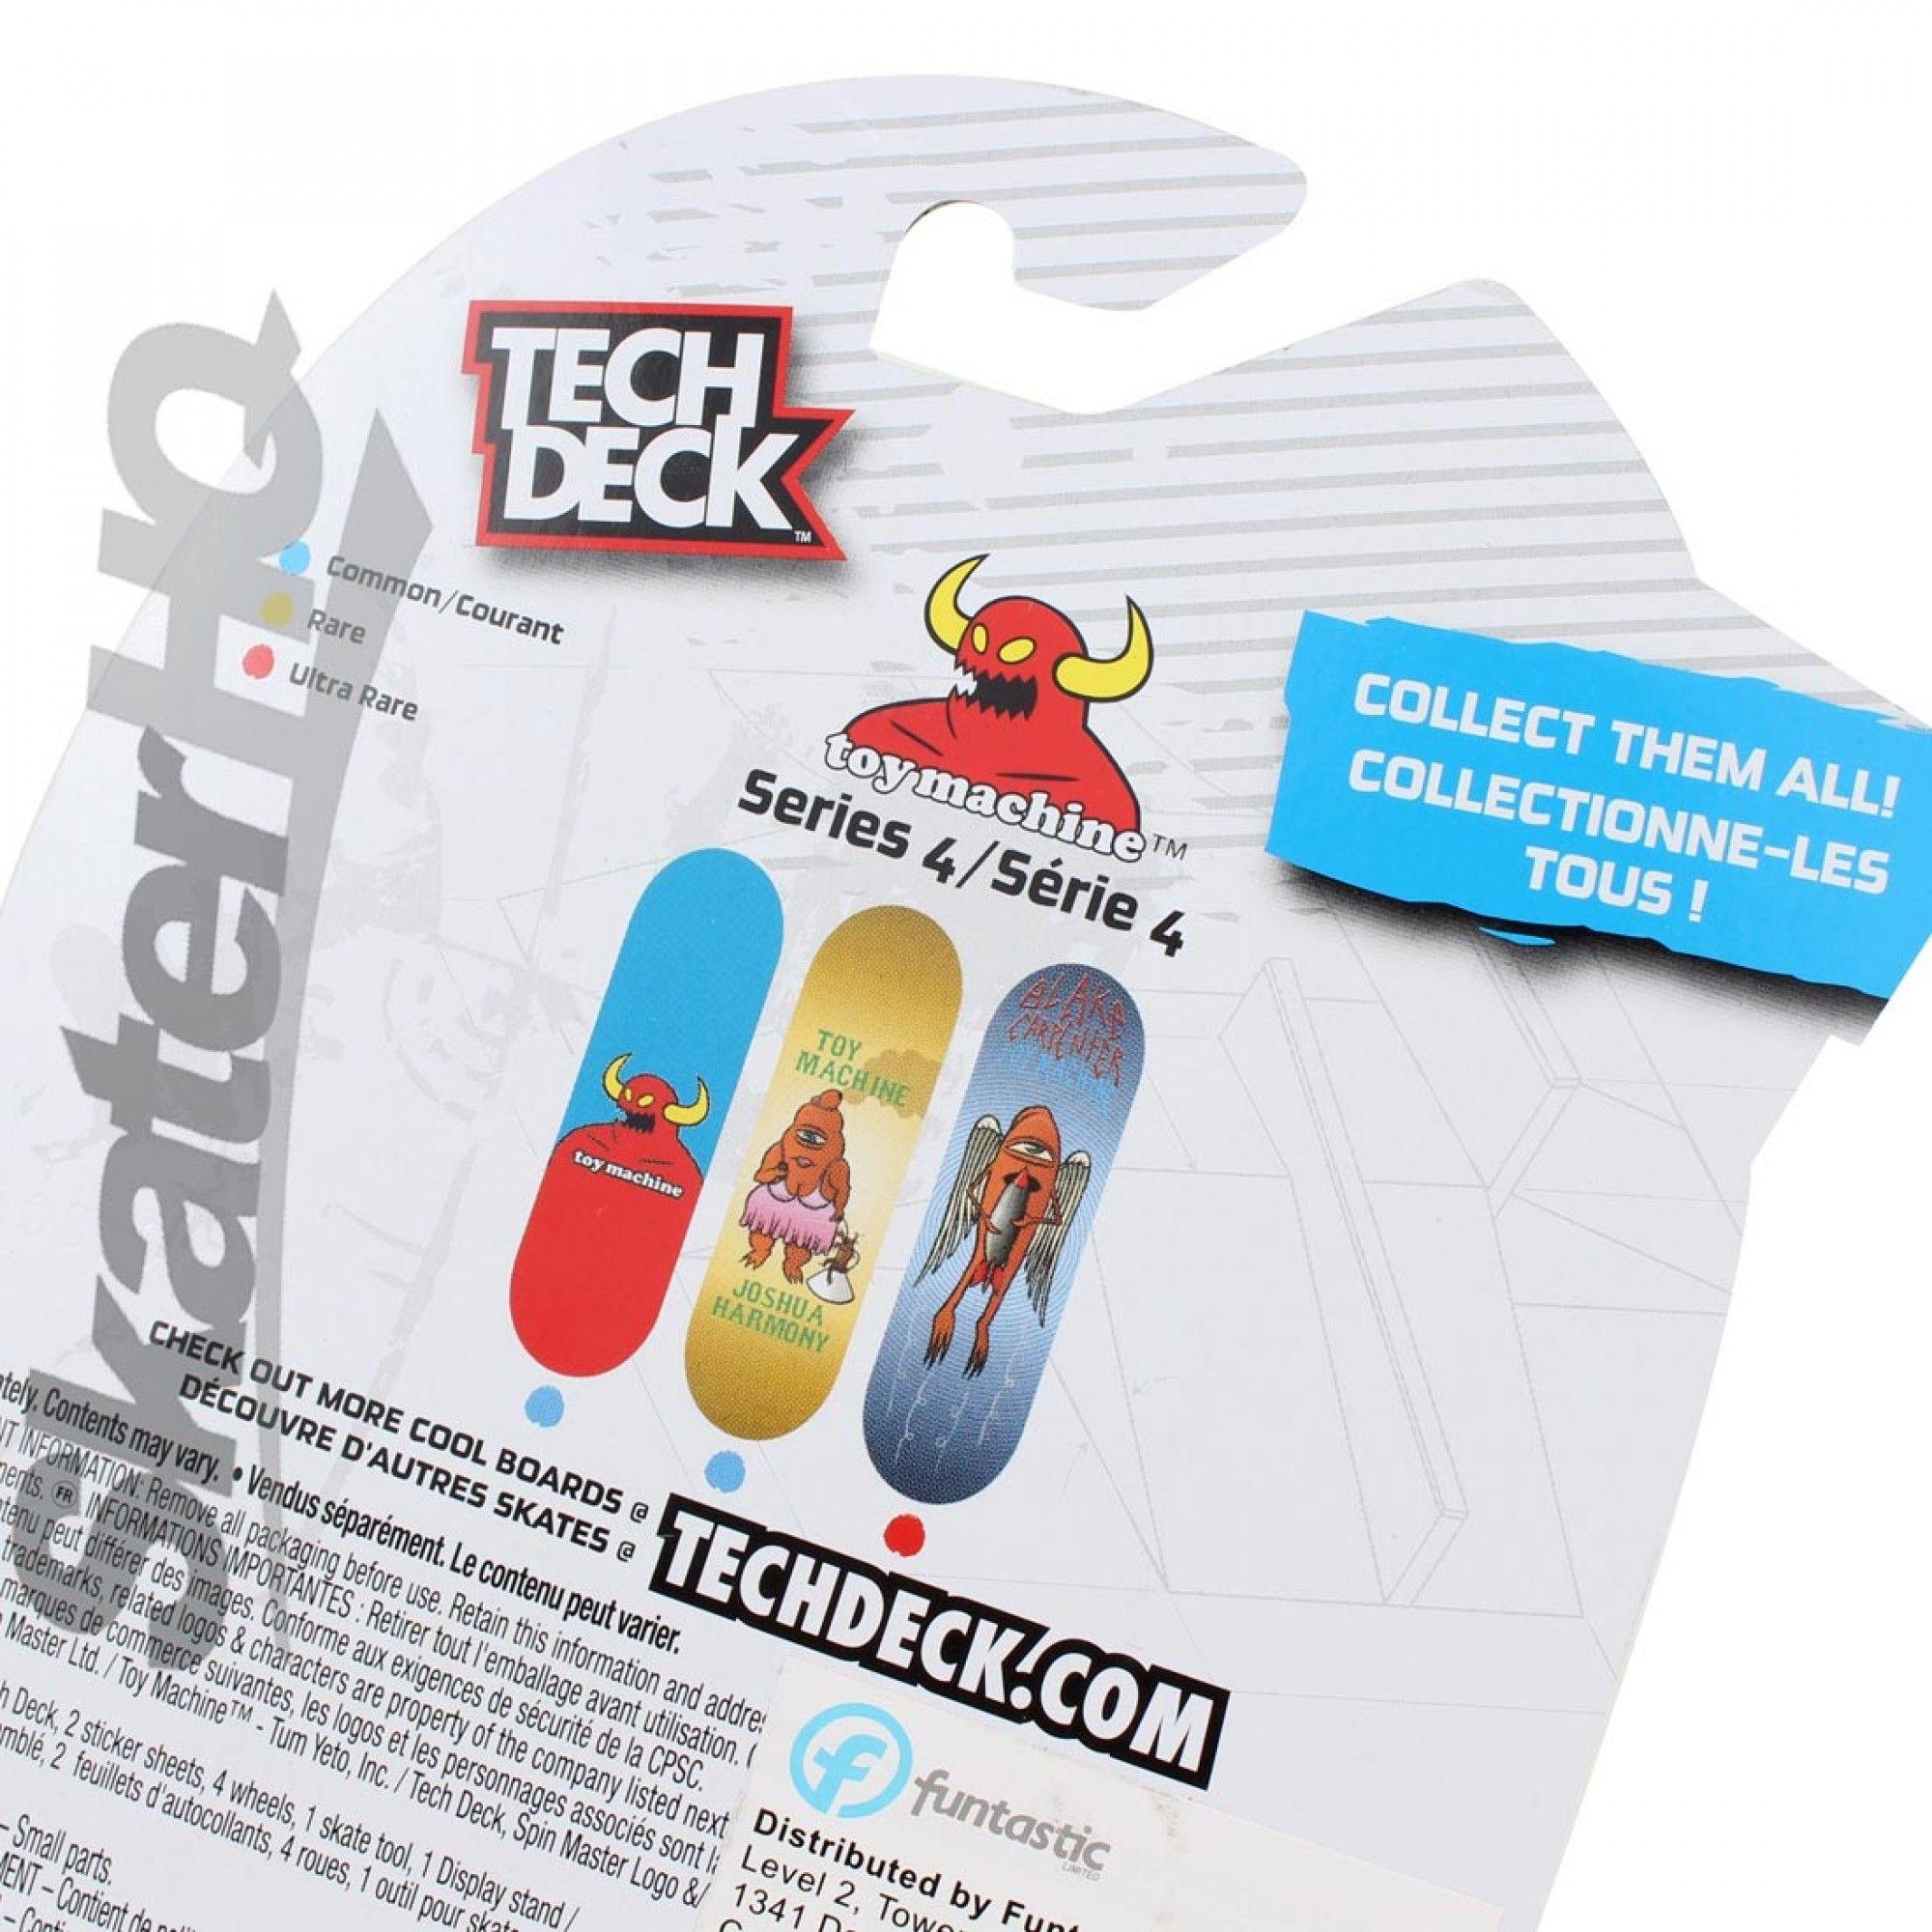 Small Toy Machine Logo - Tech Deck Toy Machine Harmony Fat Sect Series 4 Skater HQ